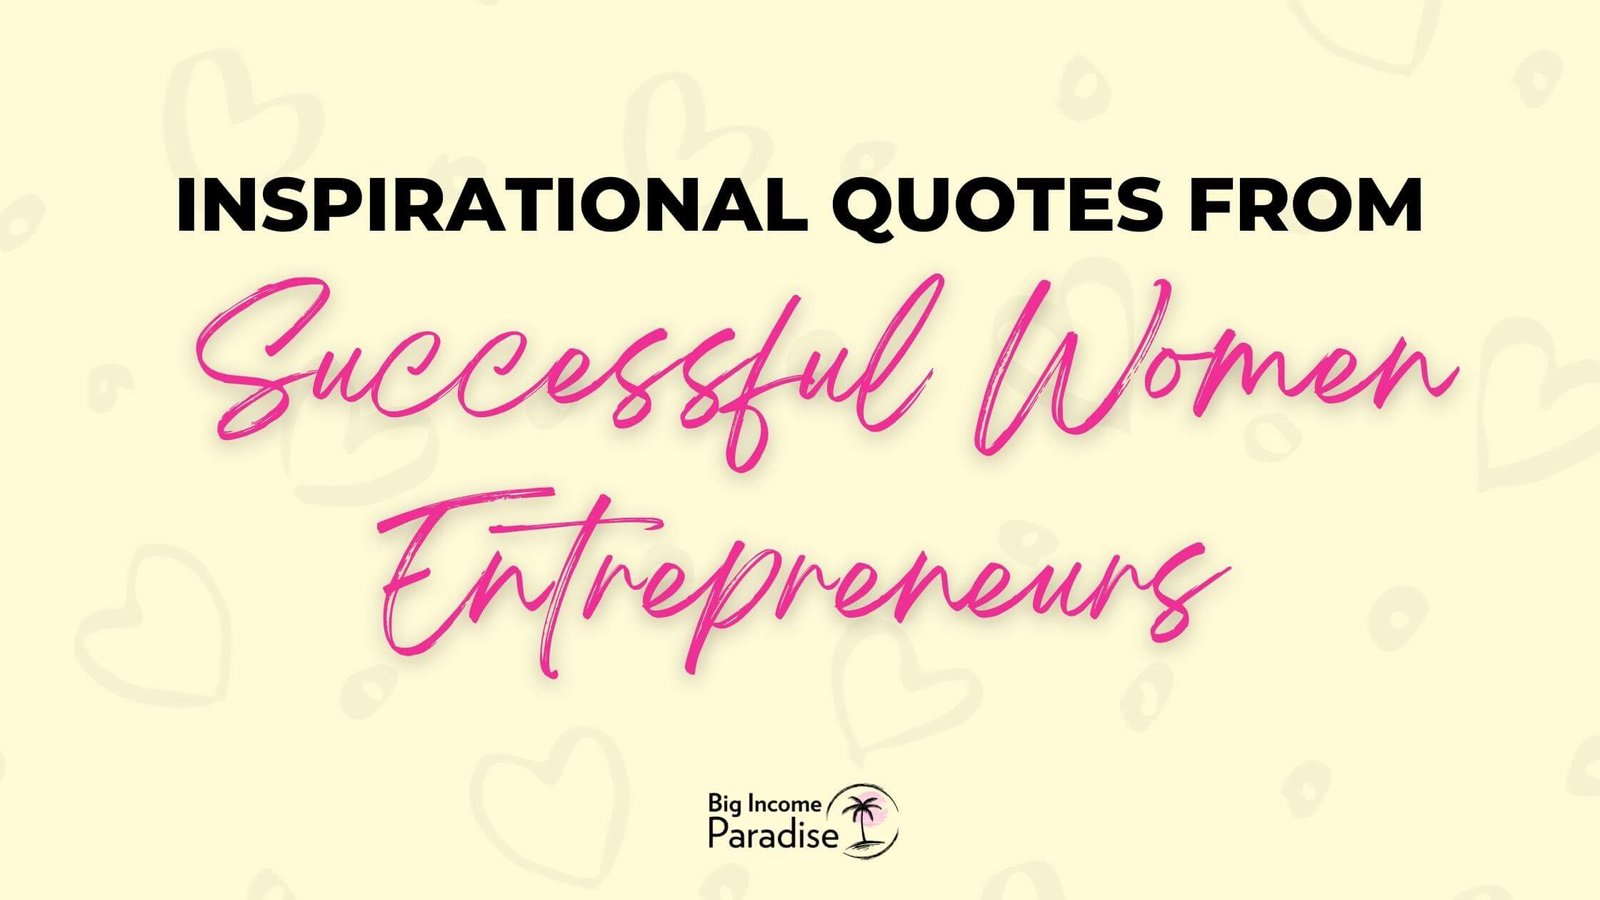 Inspirational Quotes From Successful Women Entrepreneurs To Inspire You